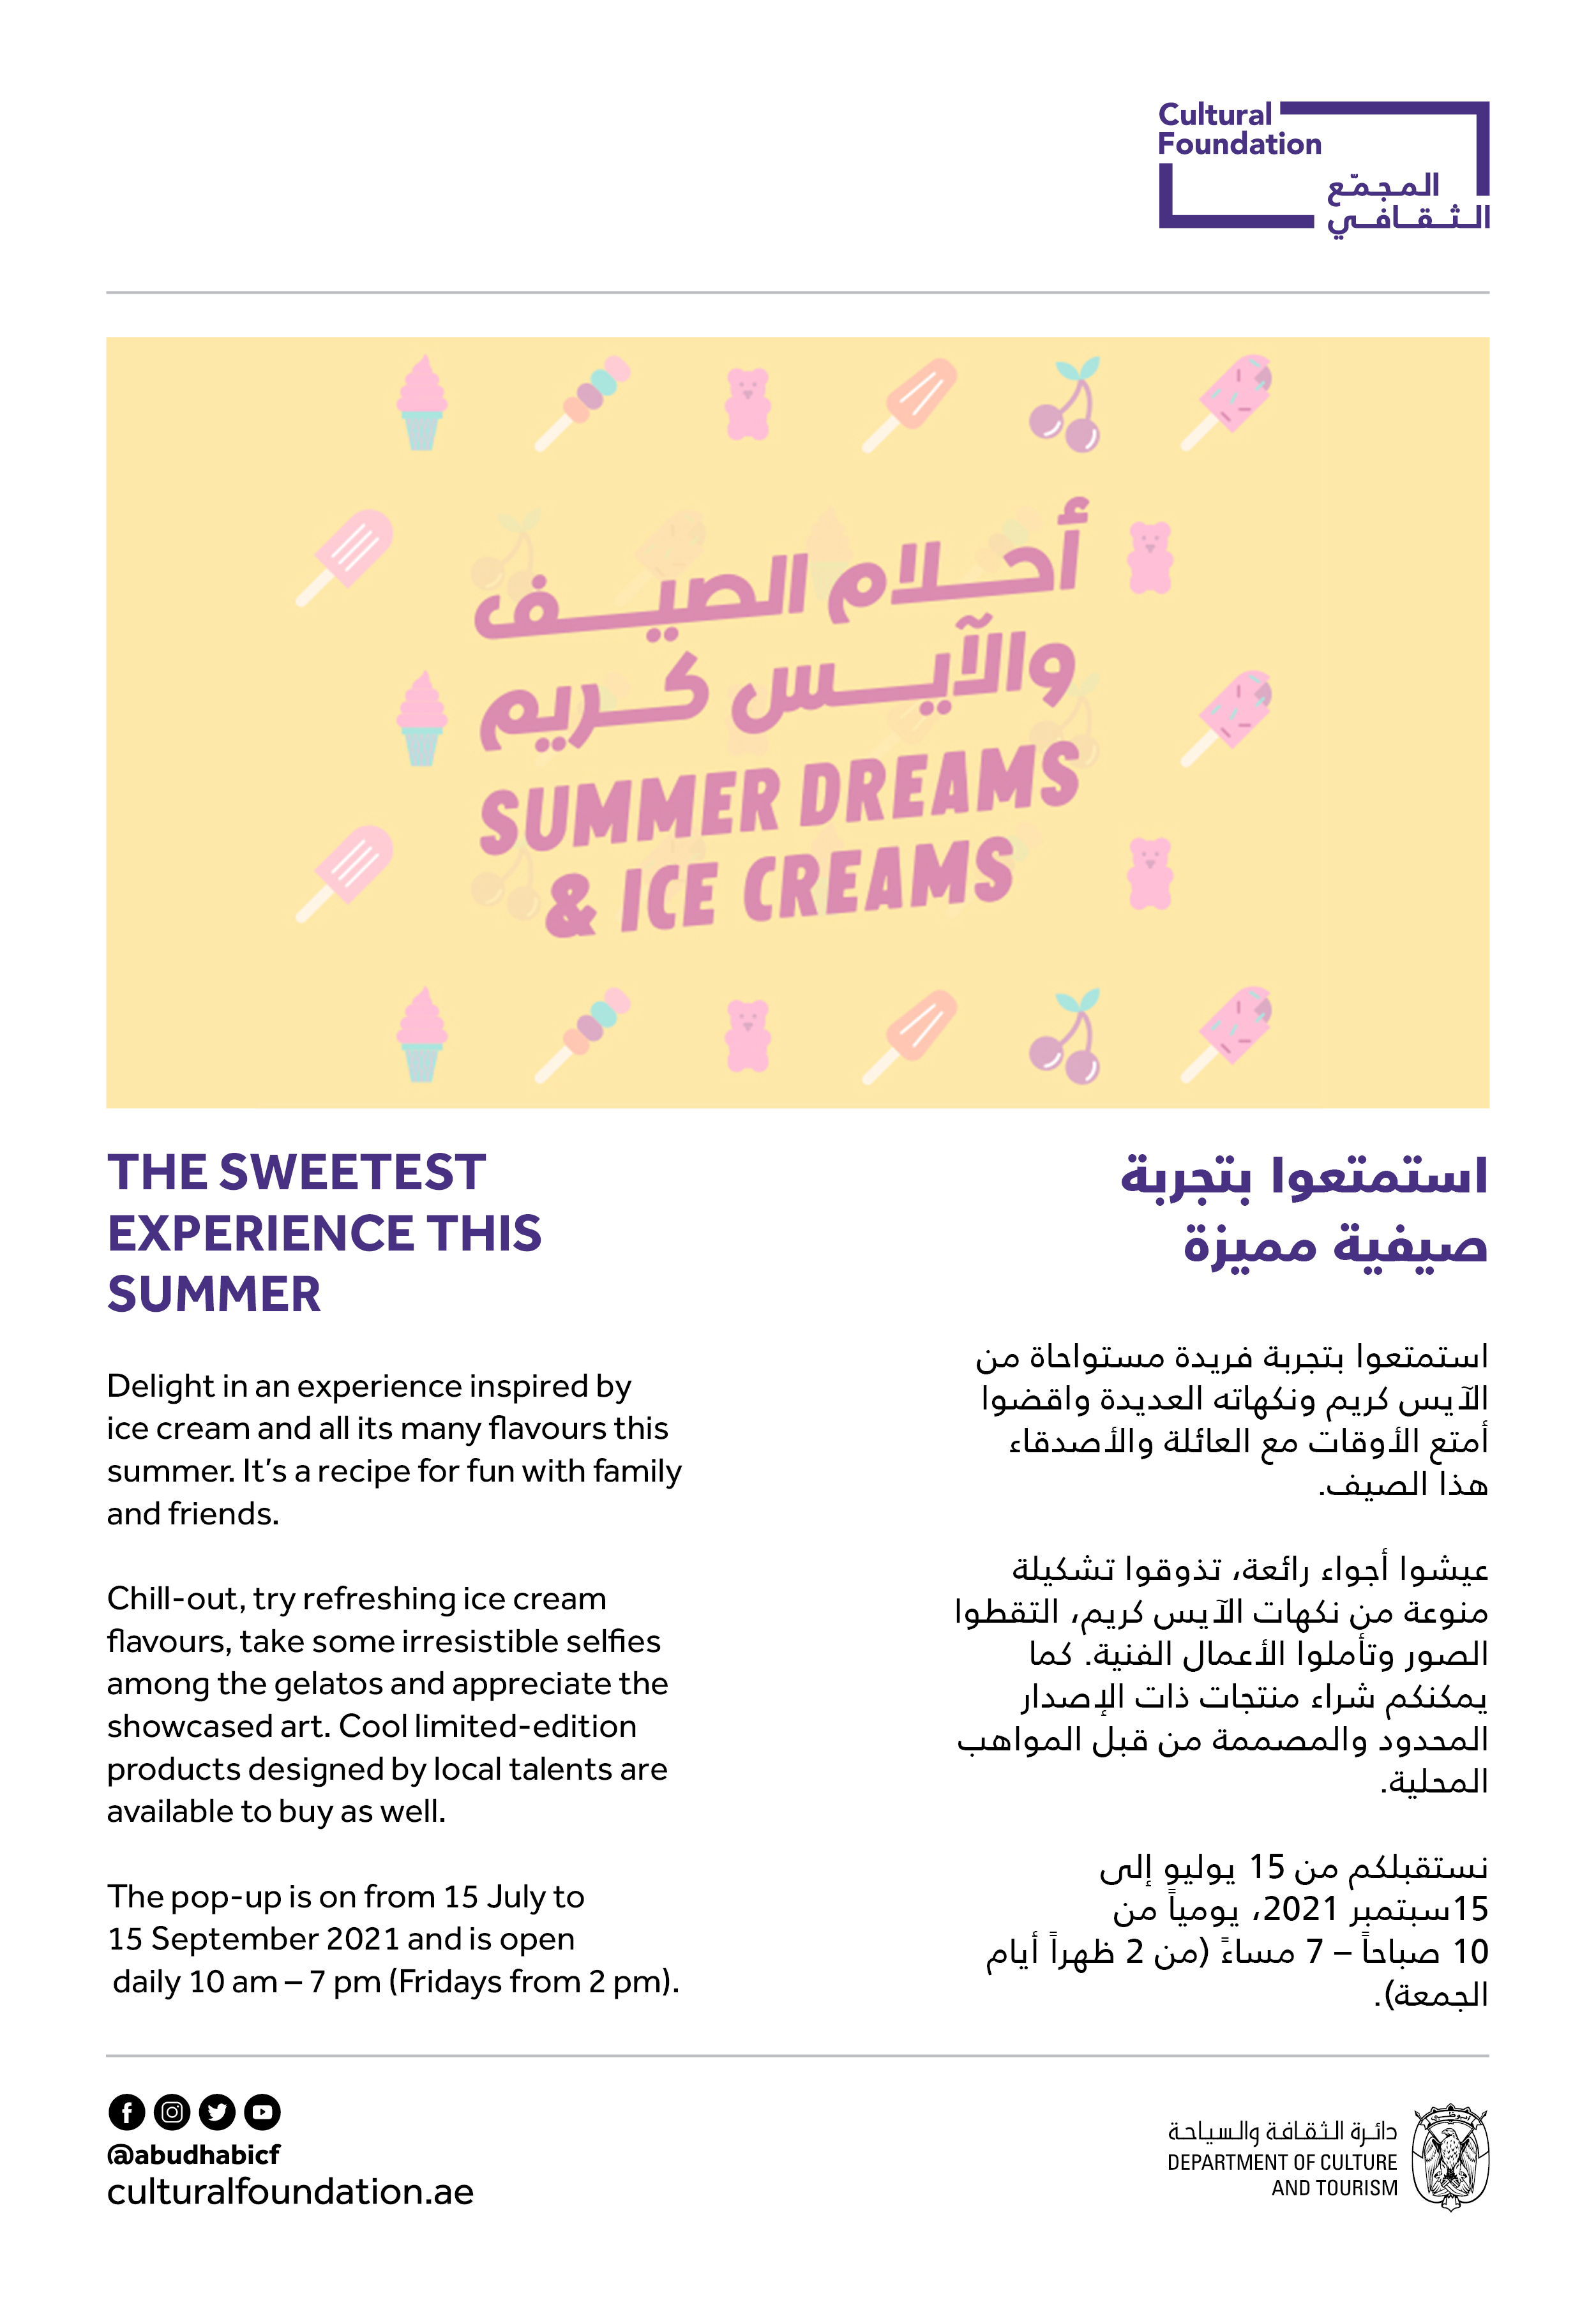  I’m very happy to be invited to participate in the “Summer Dreams’ event and exhibition hosted by the Abu Dhabi Cultural Foundation open from 15 July - 15 September 2021 